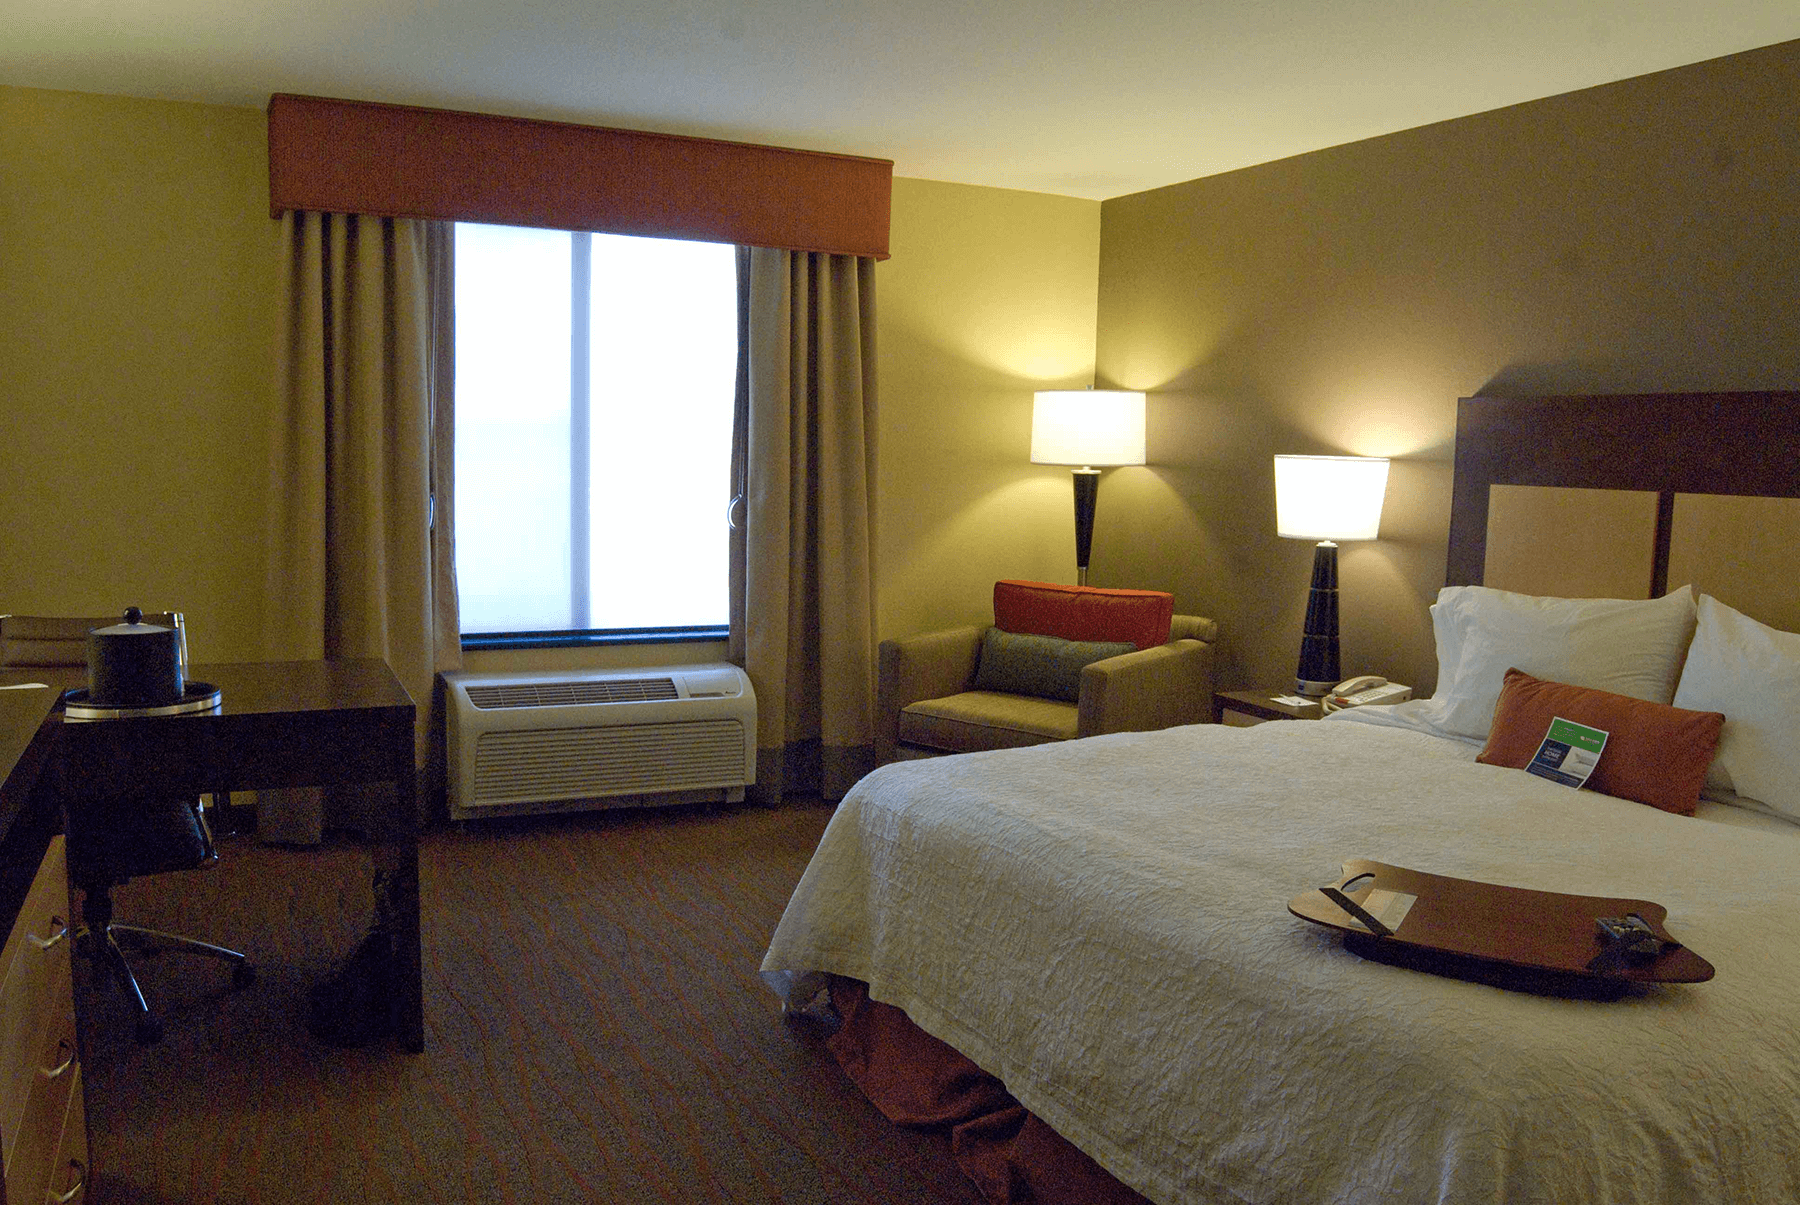  Hampton Inn and Suites Spokane room interior with king bed 